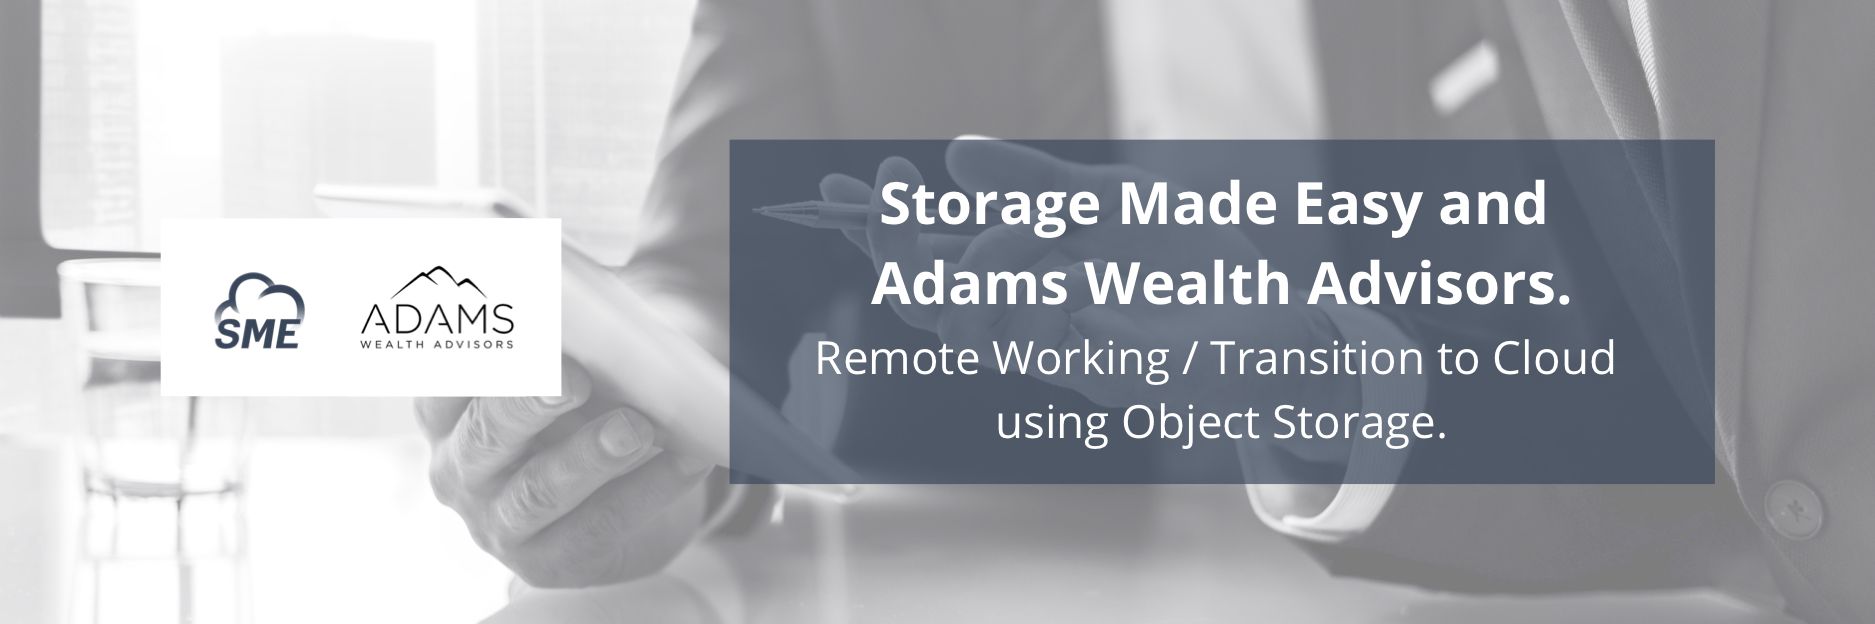 Adams Wealth Advisors chooses the File Fabric for remote working and Cloud transition using Object Storage